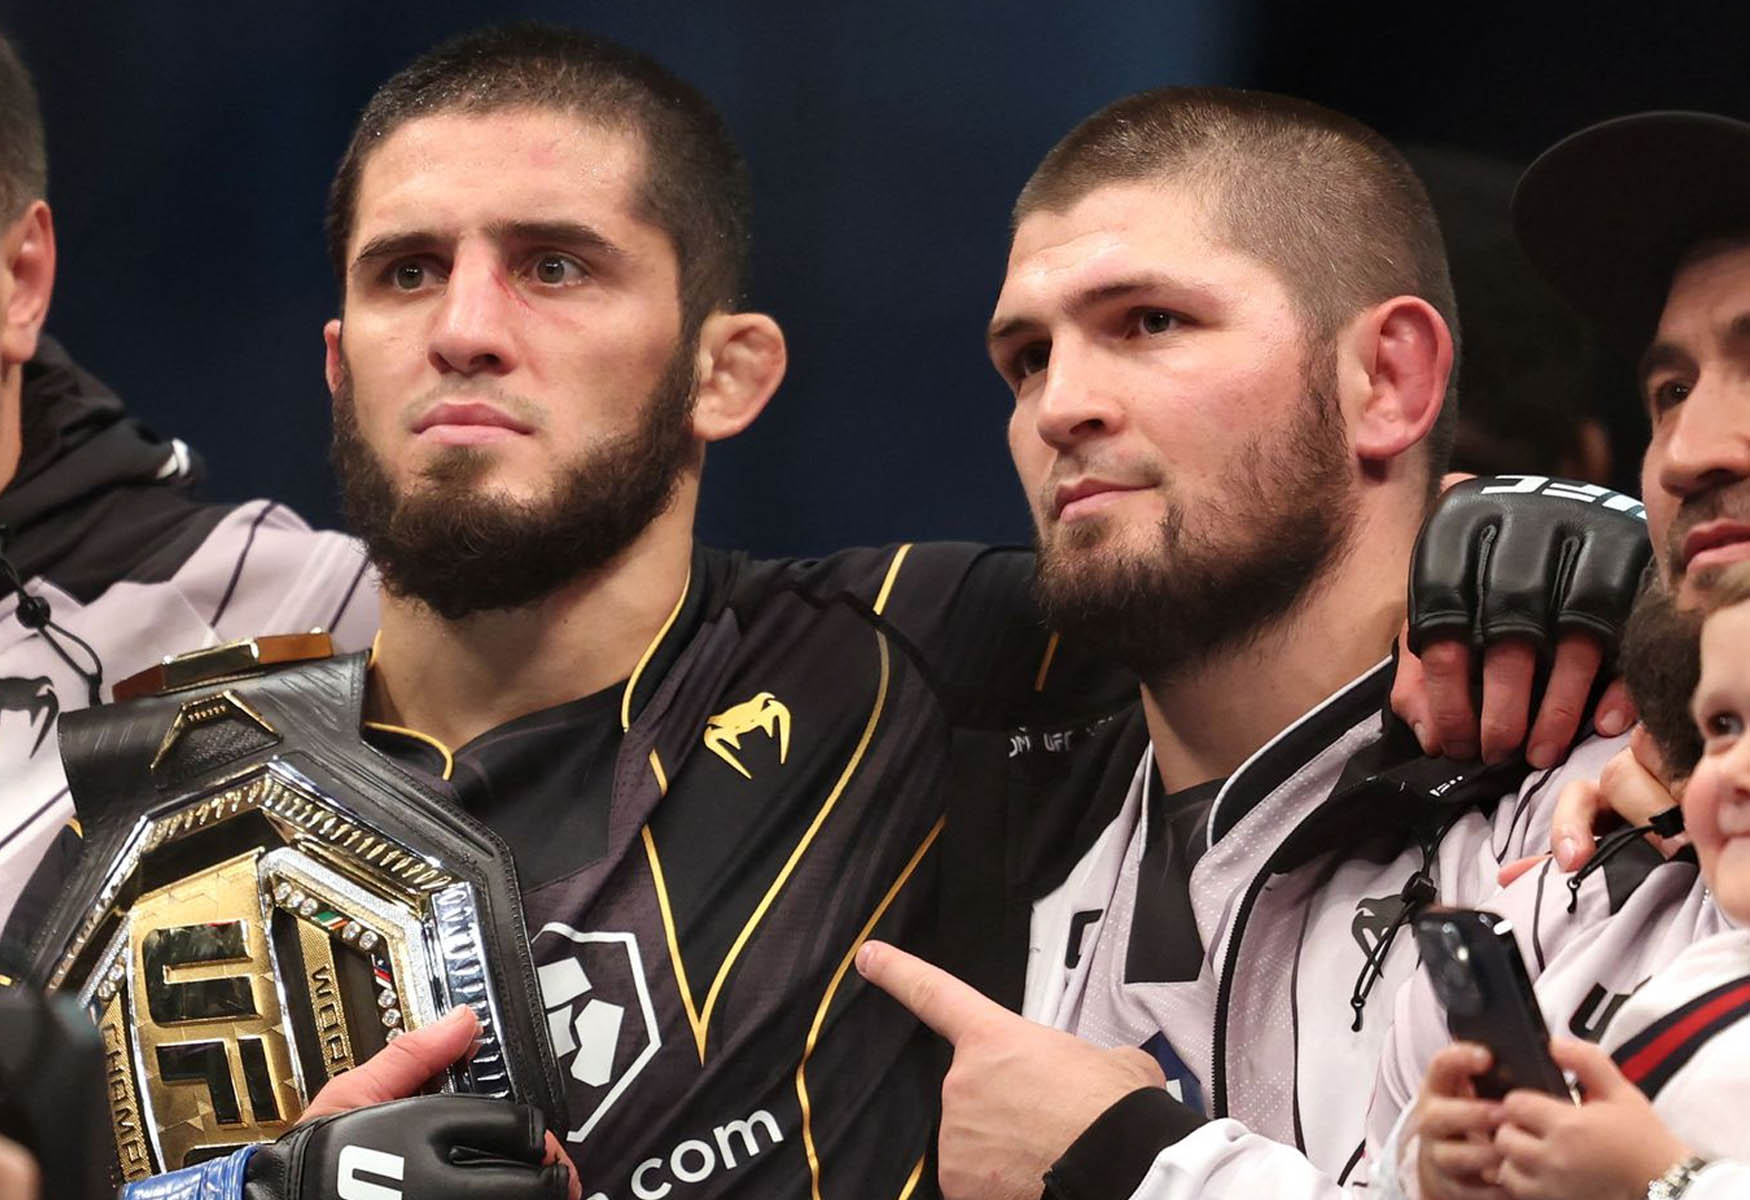 Khabib Nurmagomedov Wants Islam Makhachev To Surpass His Dominance, Says Fighter’s Manager